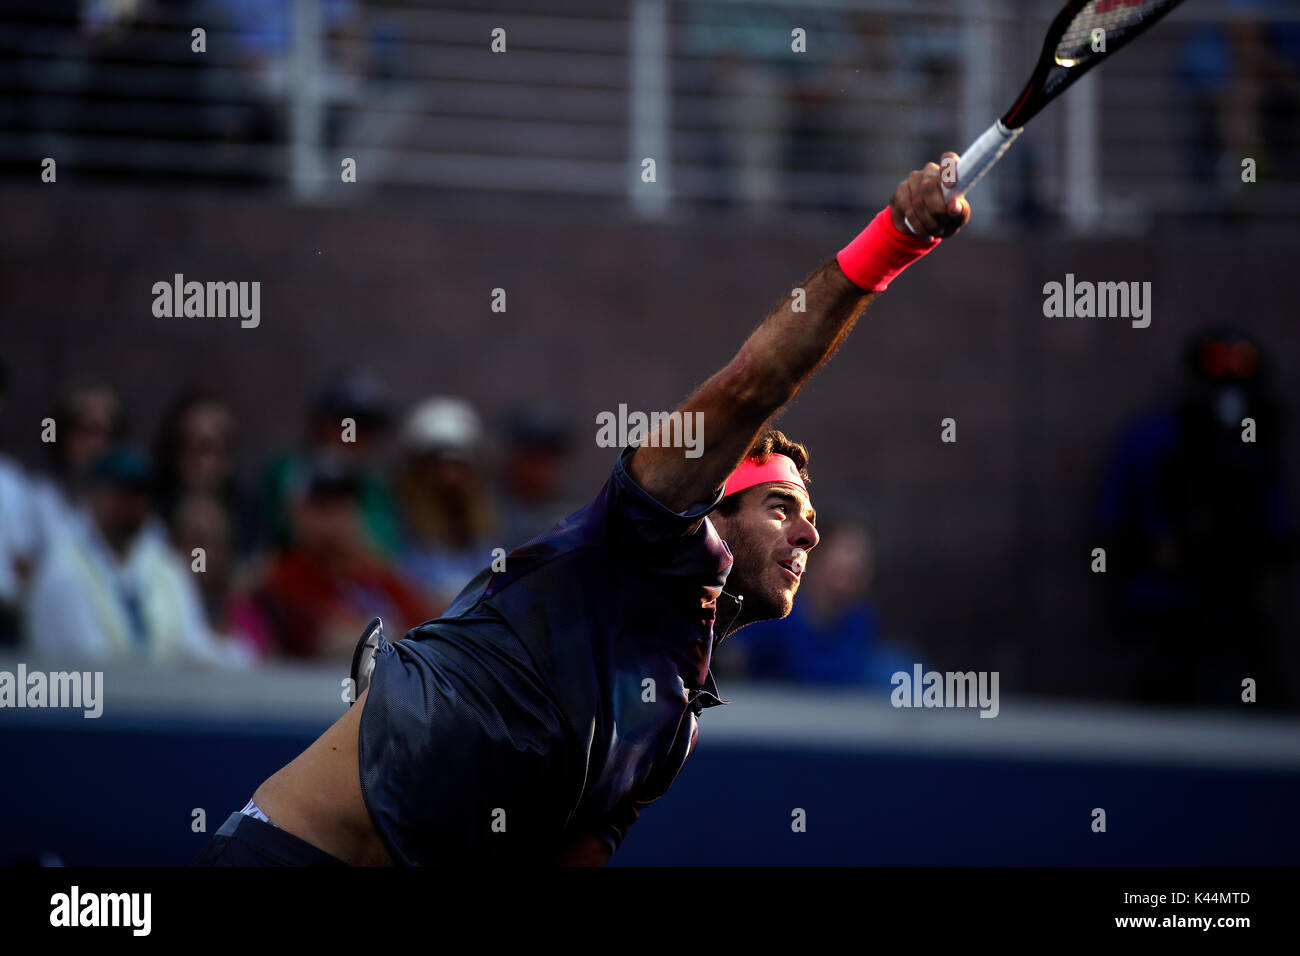 Flushing Meadow, New York, USA. 4th Sep, 2017. US Open Tennis: Juan Martin del Potro serving to number 6 seeded Dominic Thiem of Austria in fourth round match at the US Open in Flushing Meadows, New York. del Potro won the match in five sets to advance to the quarterfinals. Credit: Adam Stoltman/Alamy Live News Stock Photo